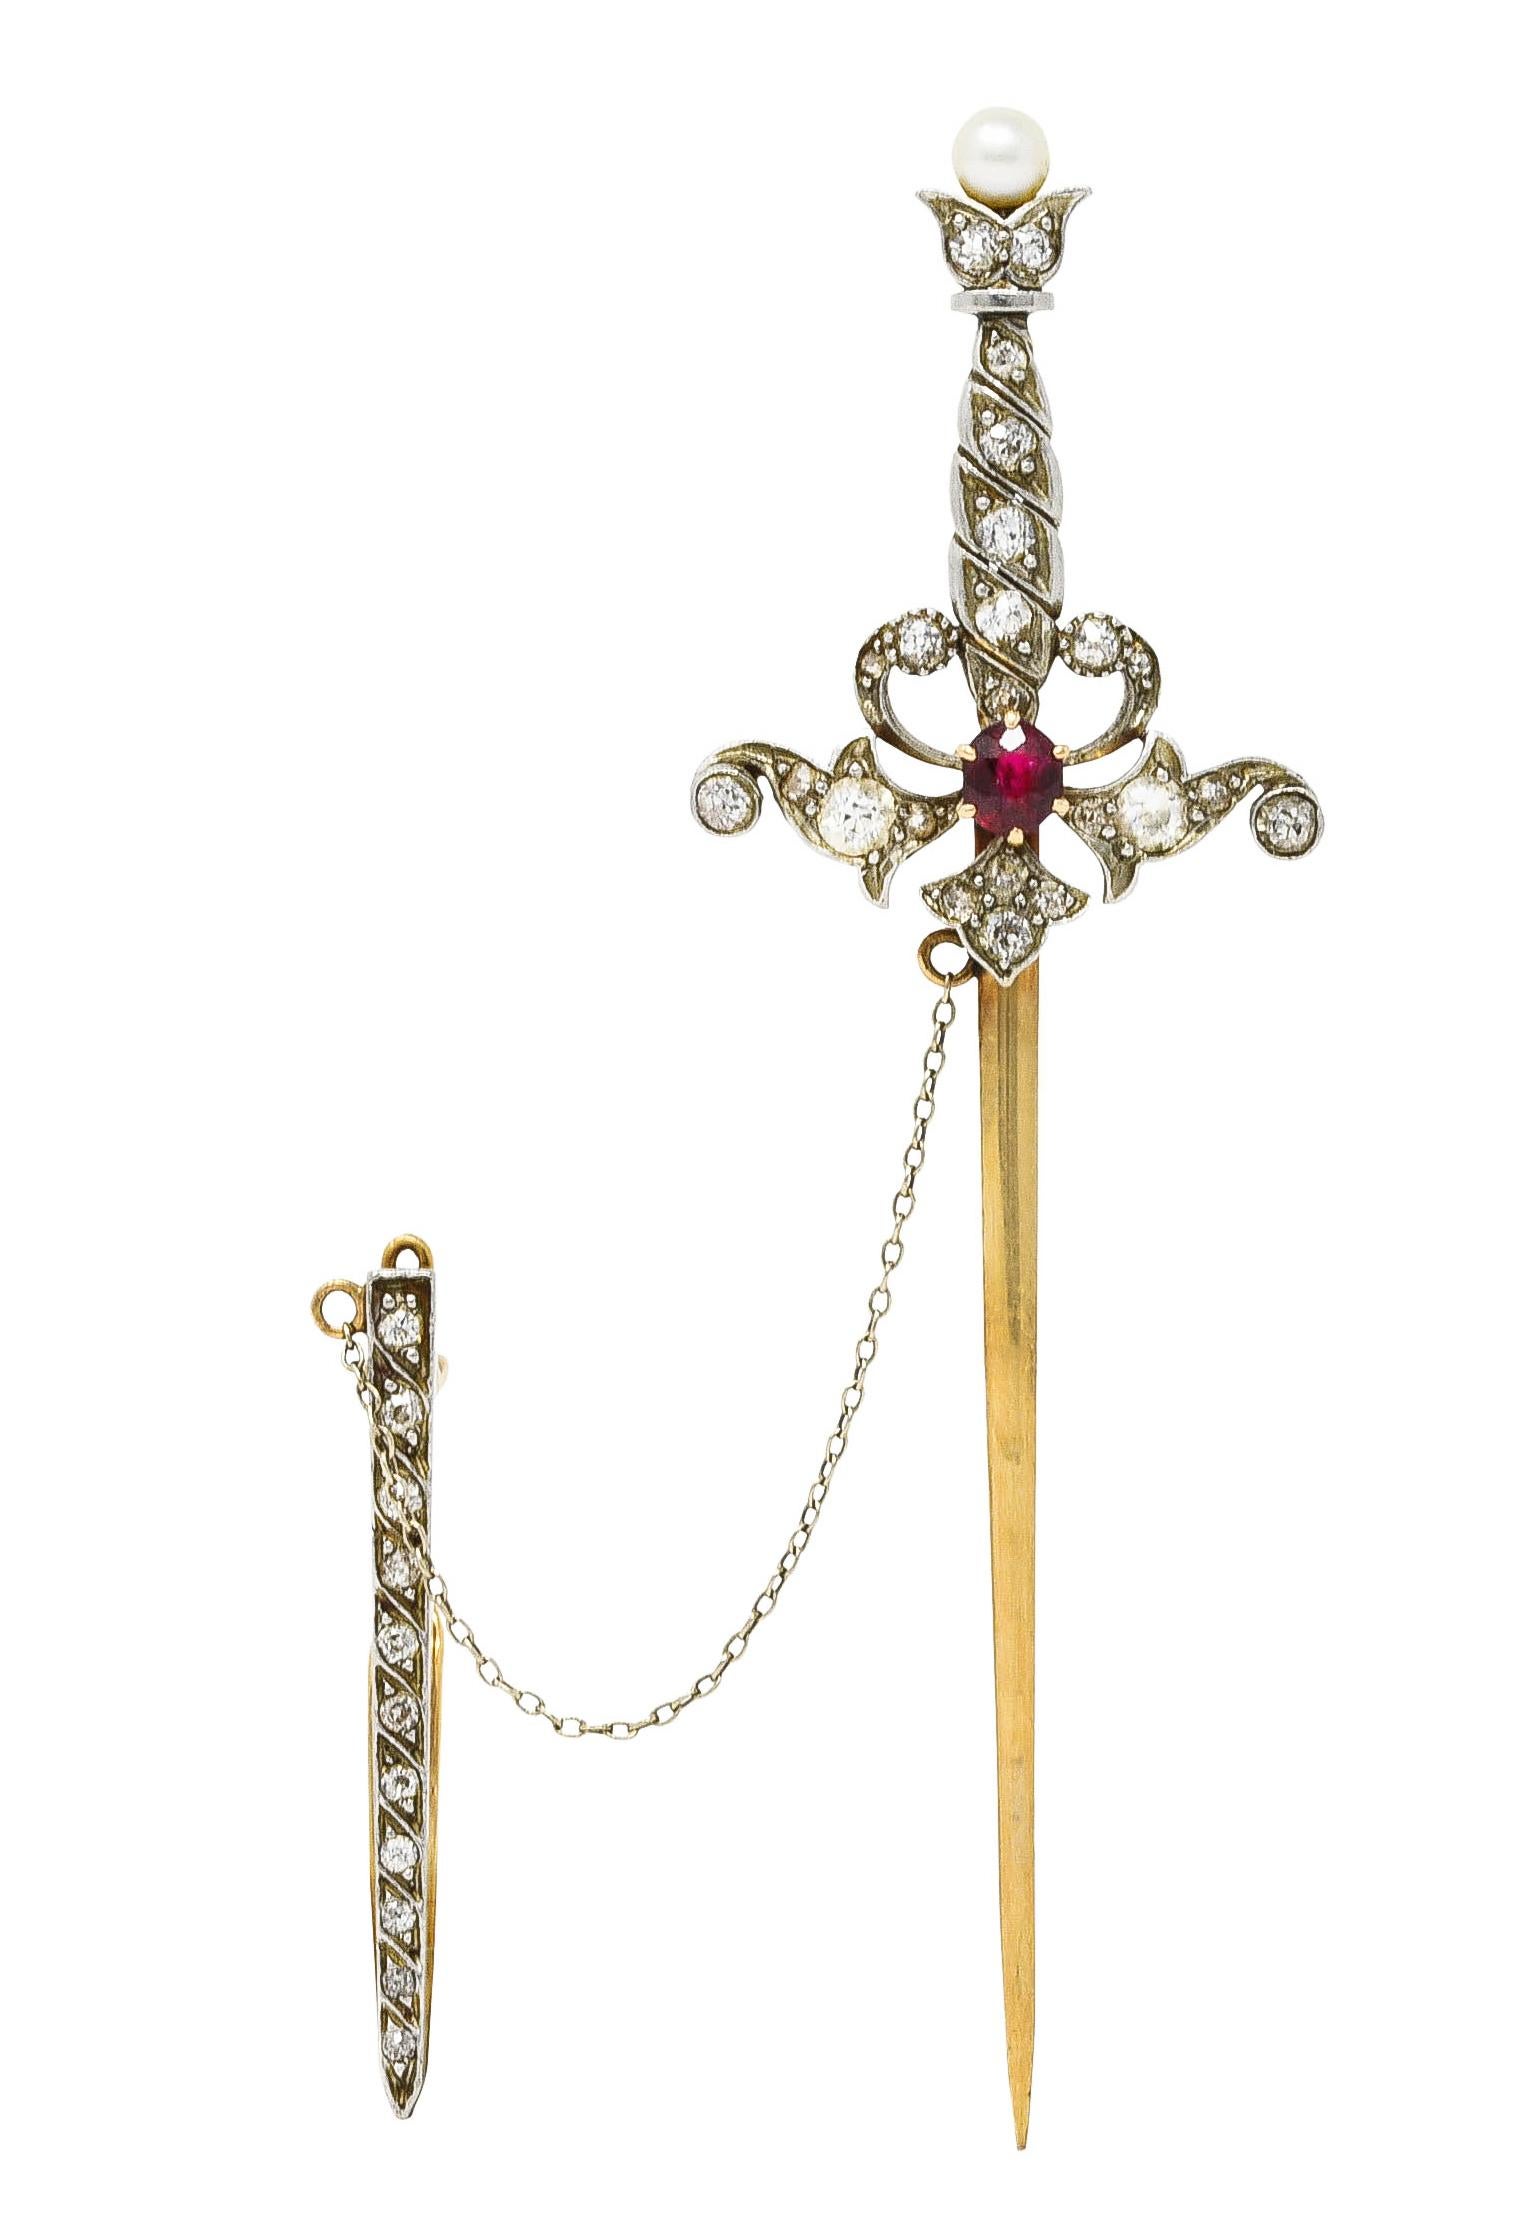 Pendant brooch is designed as a jabot style sword that can be removed from its scabbard to reveal a gold blade. Featuring a cushion cut ruby weighing approximately 0.40 carat - bright red. Hilt and scabbard are set with old mine and old European cut